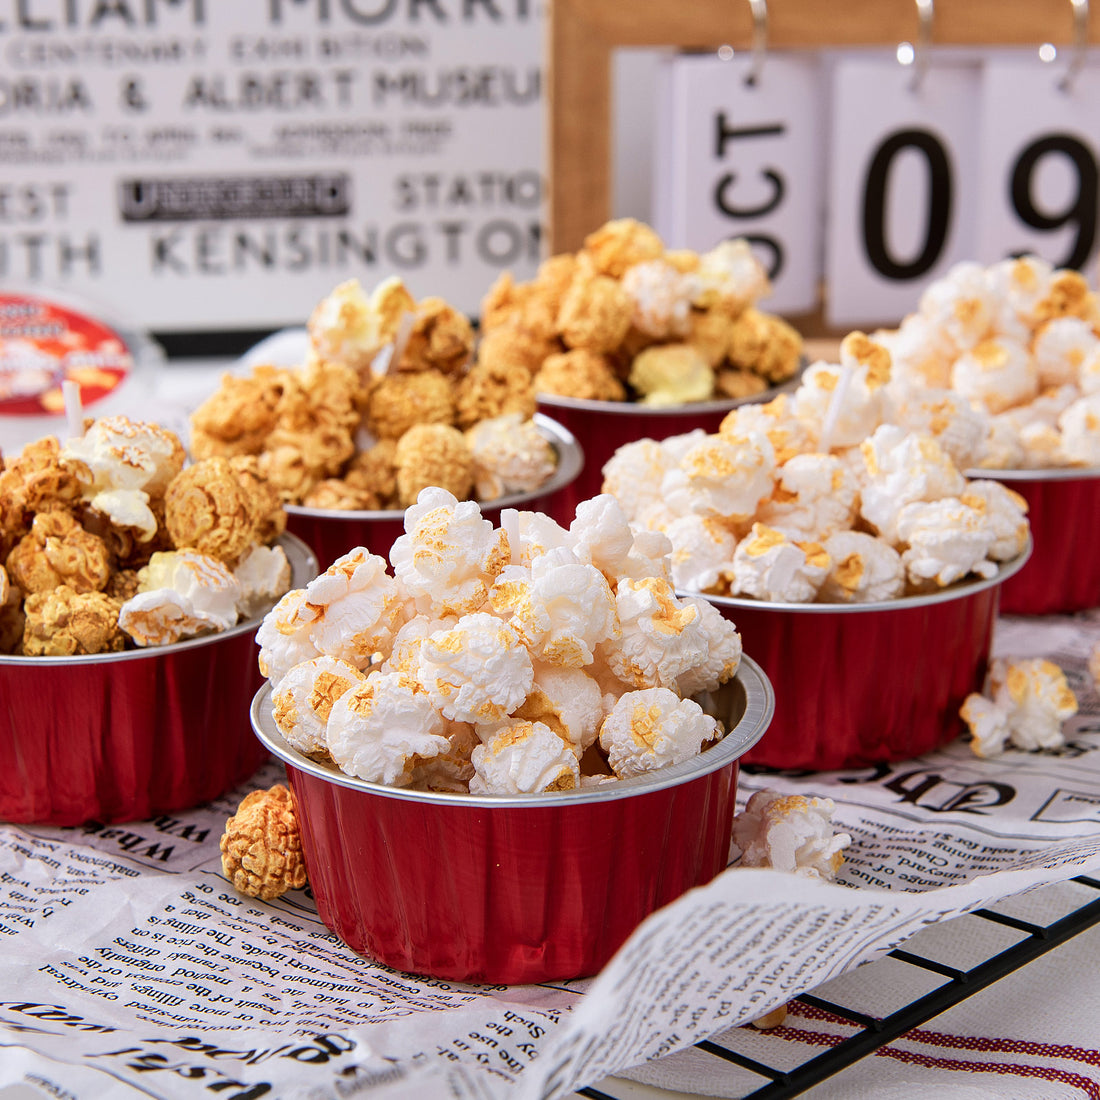 Just light up a candle and watch it burn with this Popcorn Candle.